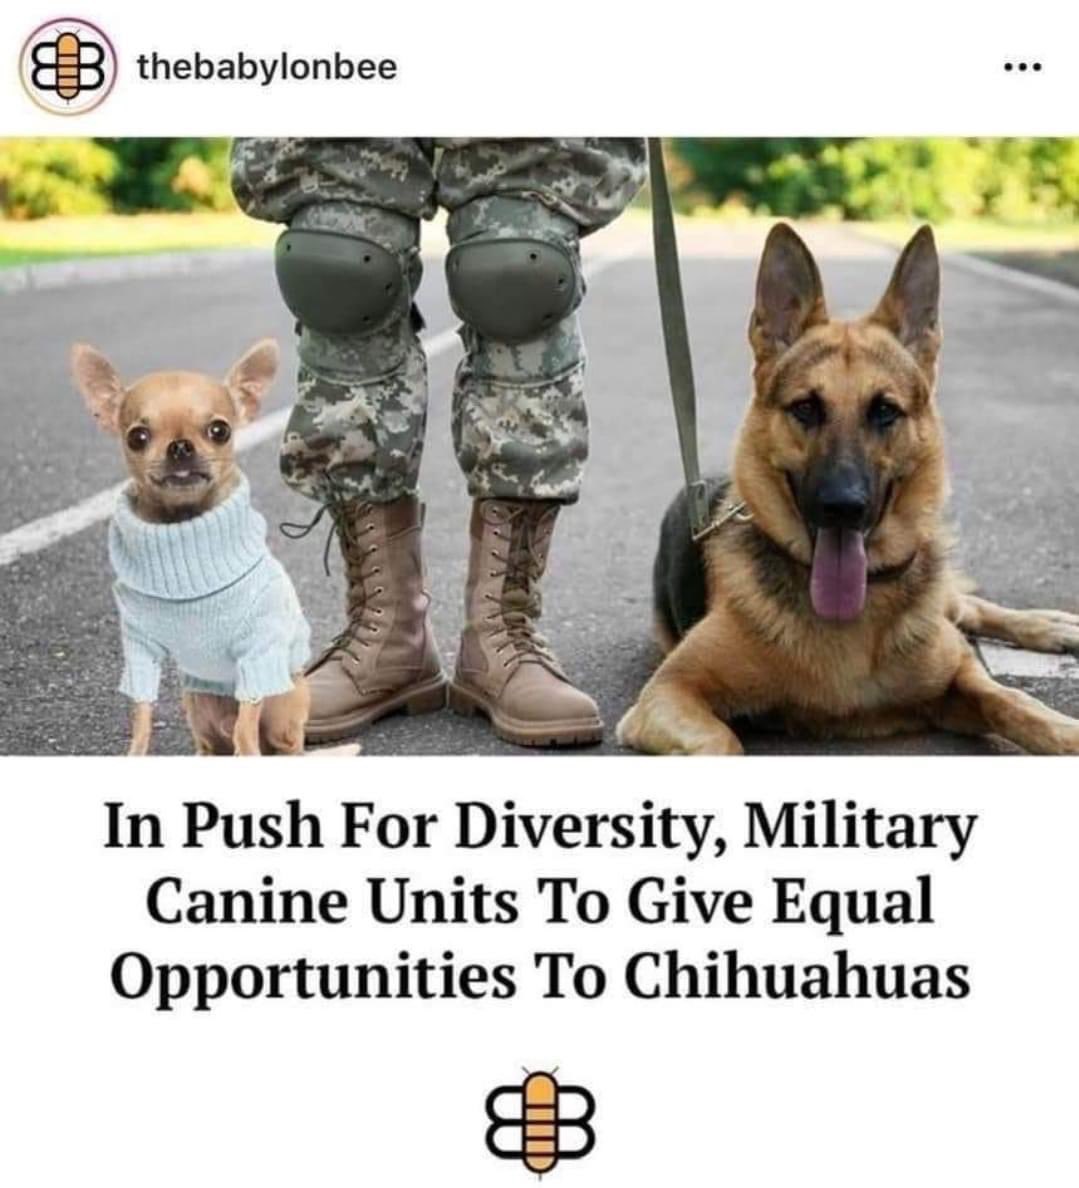 Americans think this is a joke, but these facts already went to the courts in the UK in a sex discrimination case. They ruled that police canine units need to use little dogs which are easier for women to carry, so as not to exclude women dog handlers from the police force.